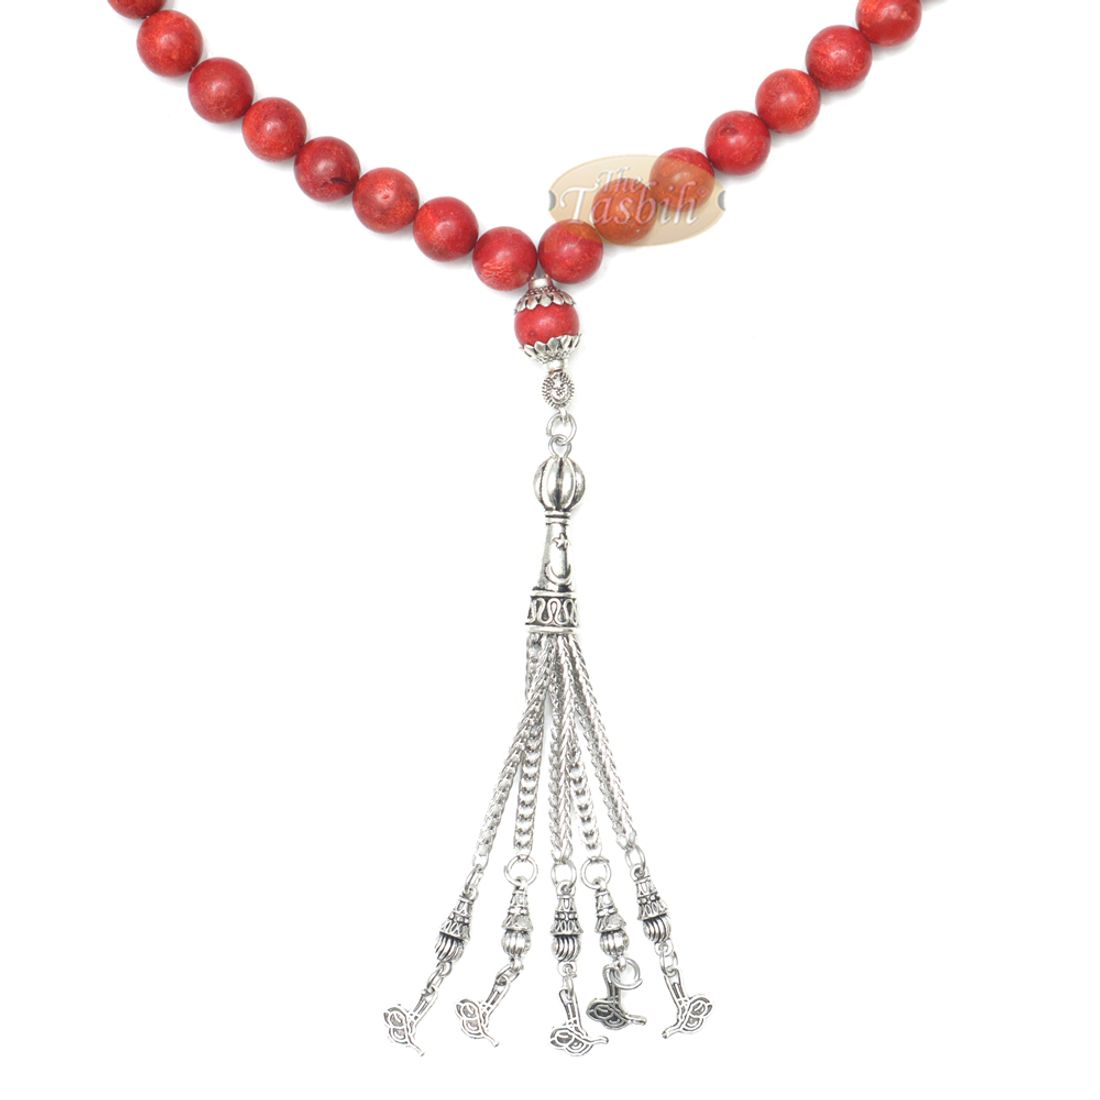 10-mm Red Sea Coral 33-Bead Prayer Beads with Ornamental Turkish Tughra 5-chain Tassel Charms